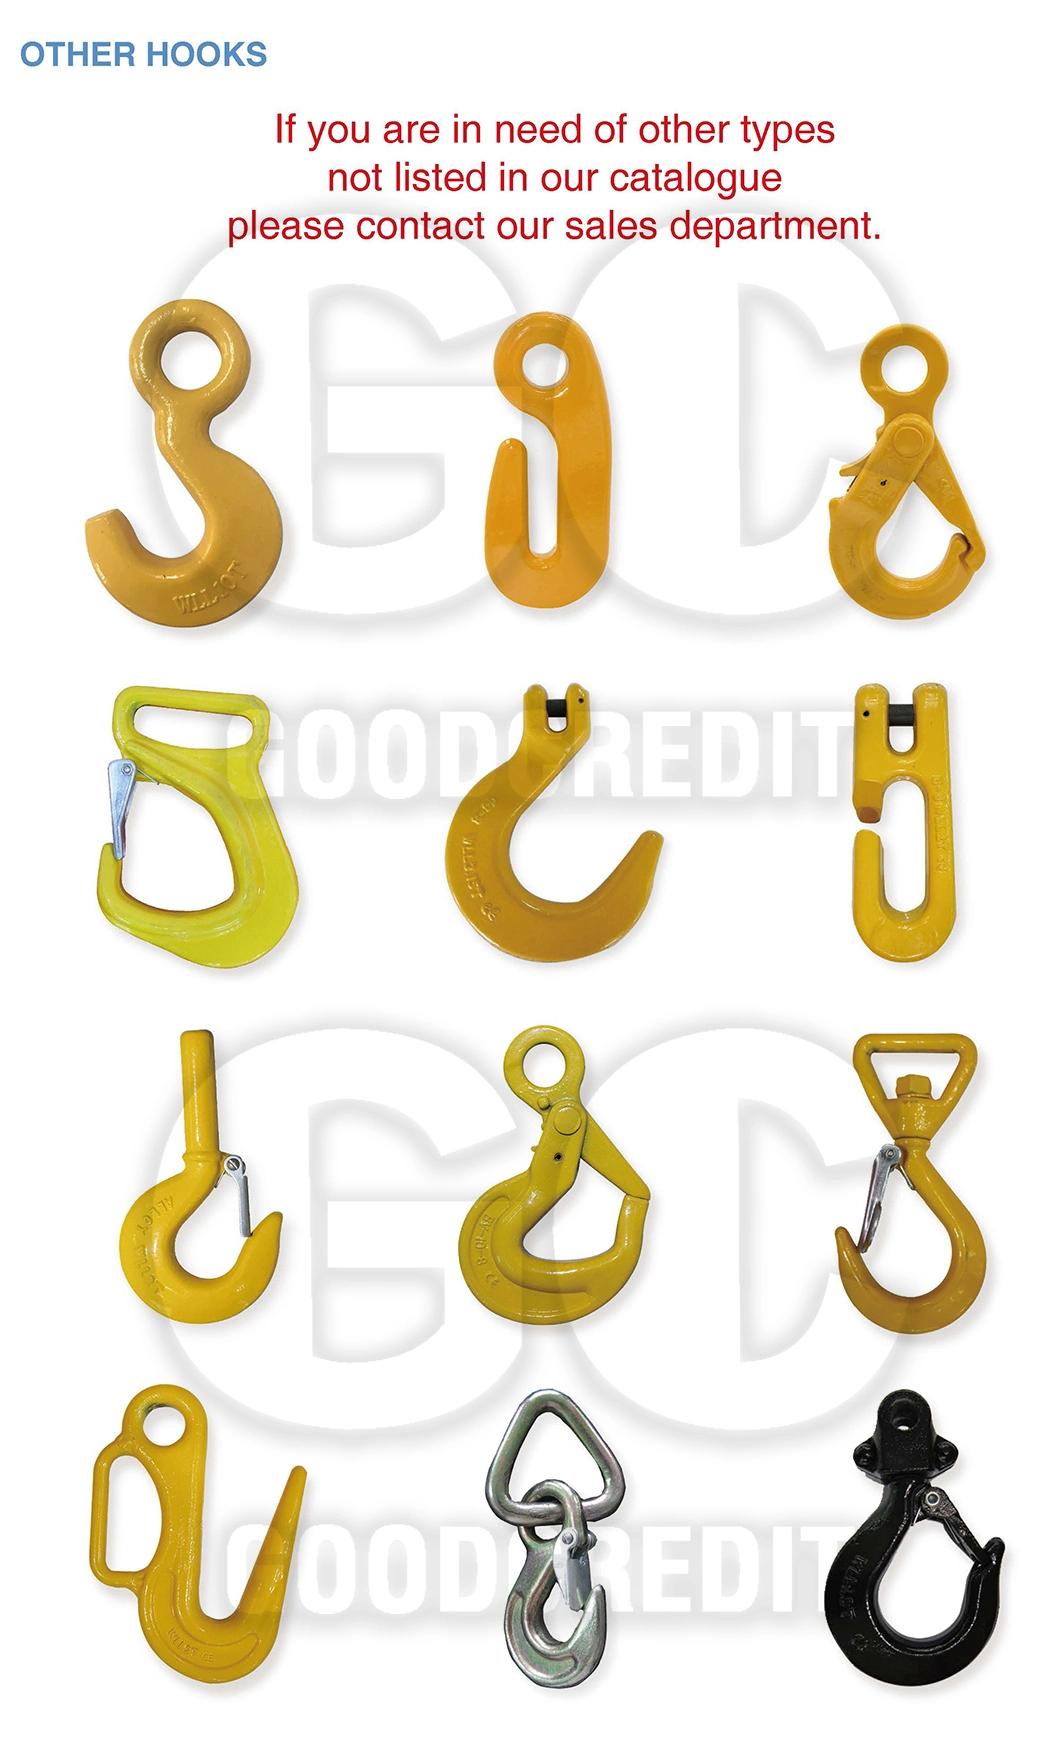 A331 Clevis Grab Hook for Lifting